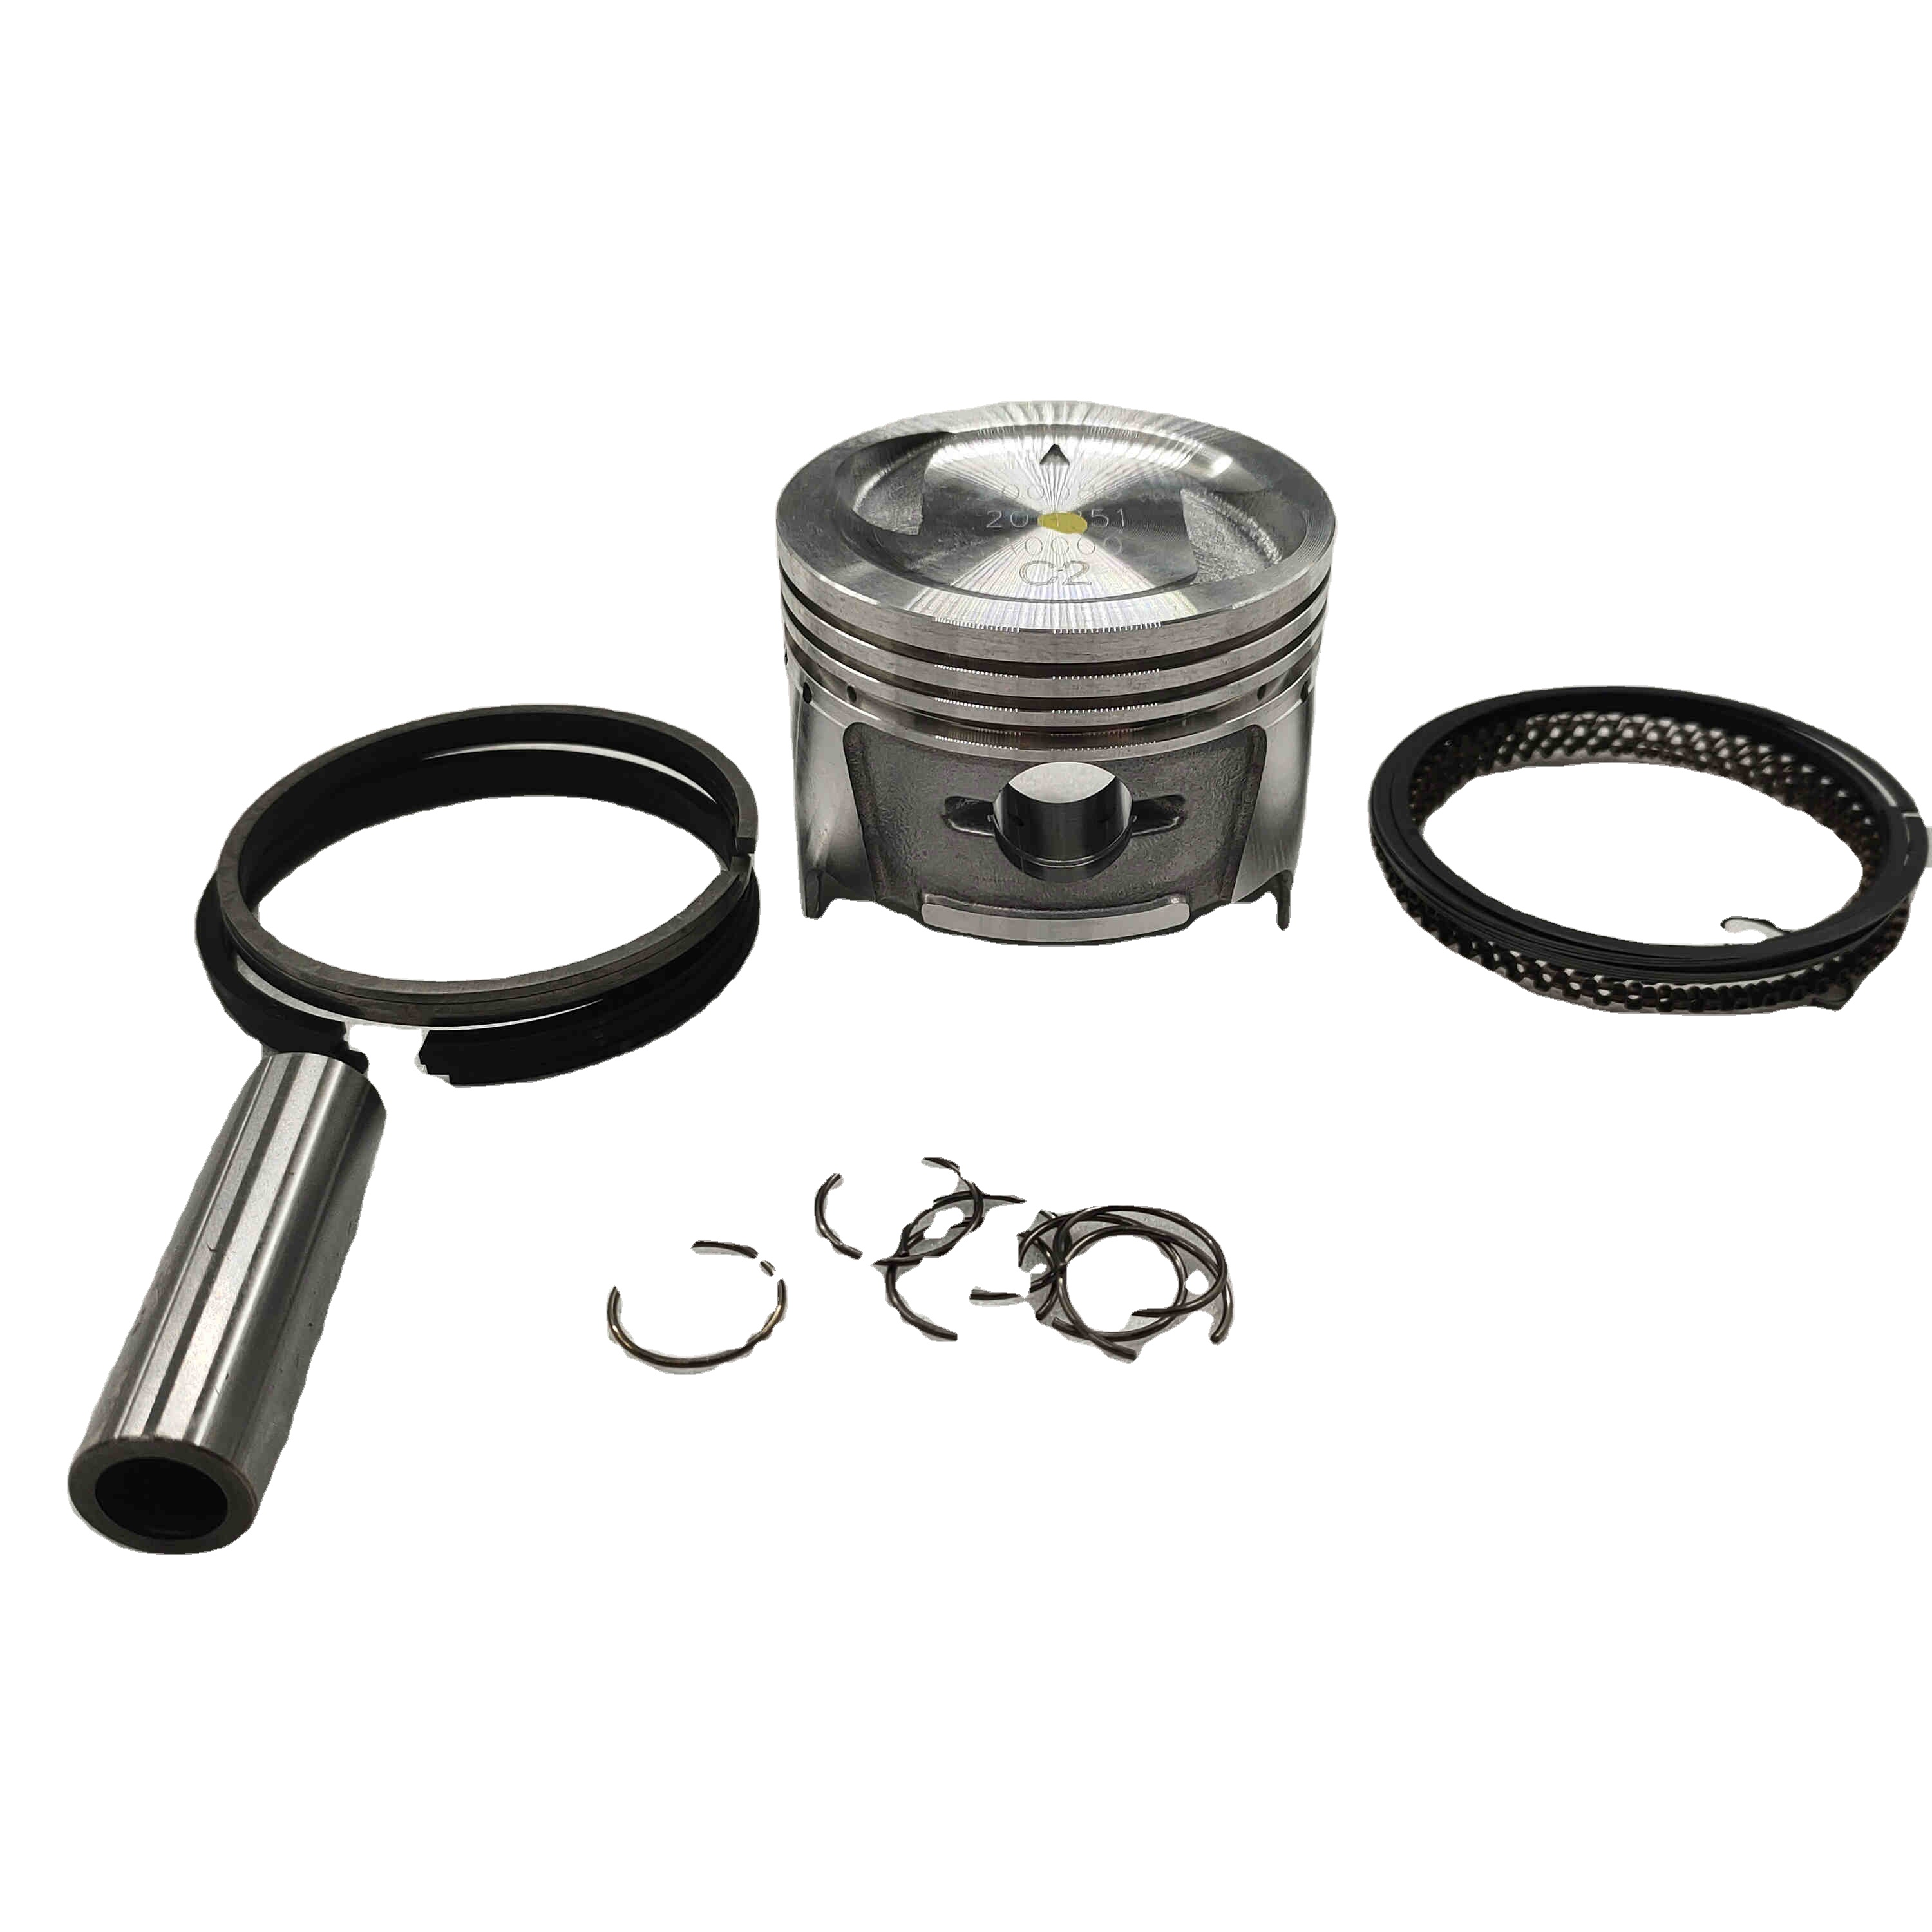 Hot sale motorcycle engine assembly spare parts  automobile spare parts 800cc water-cooled engine piston assembly